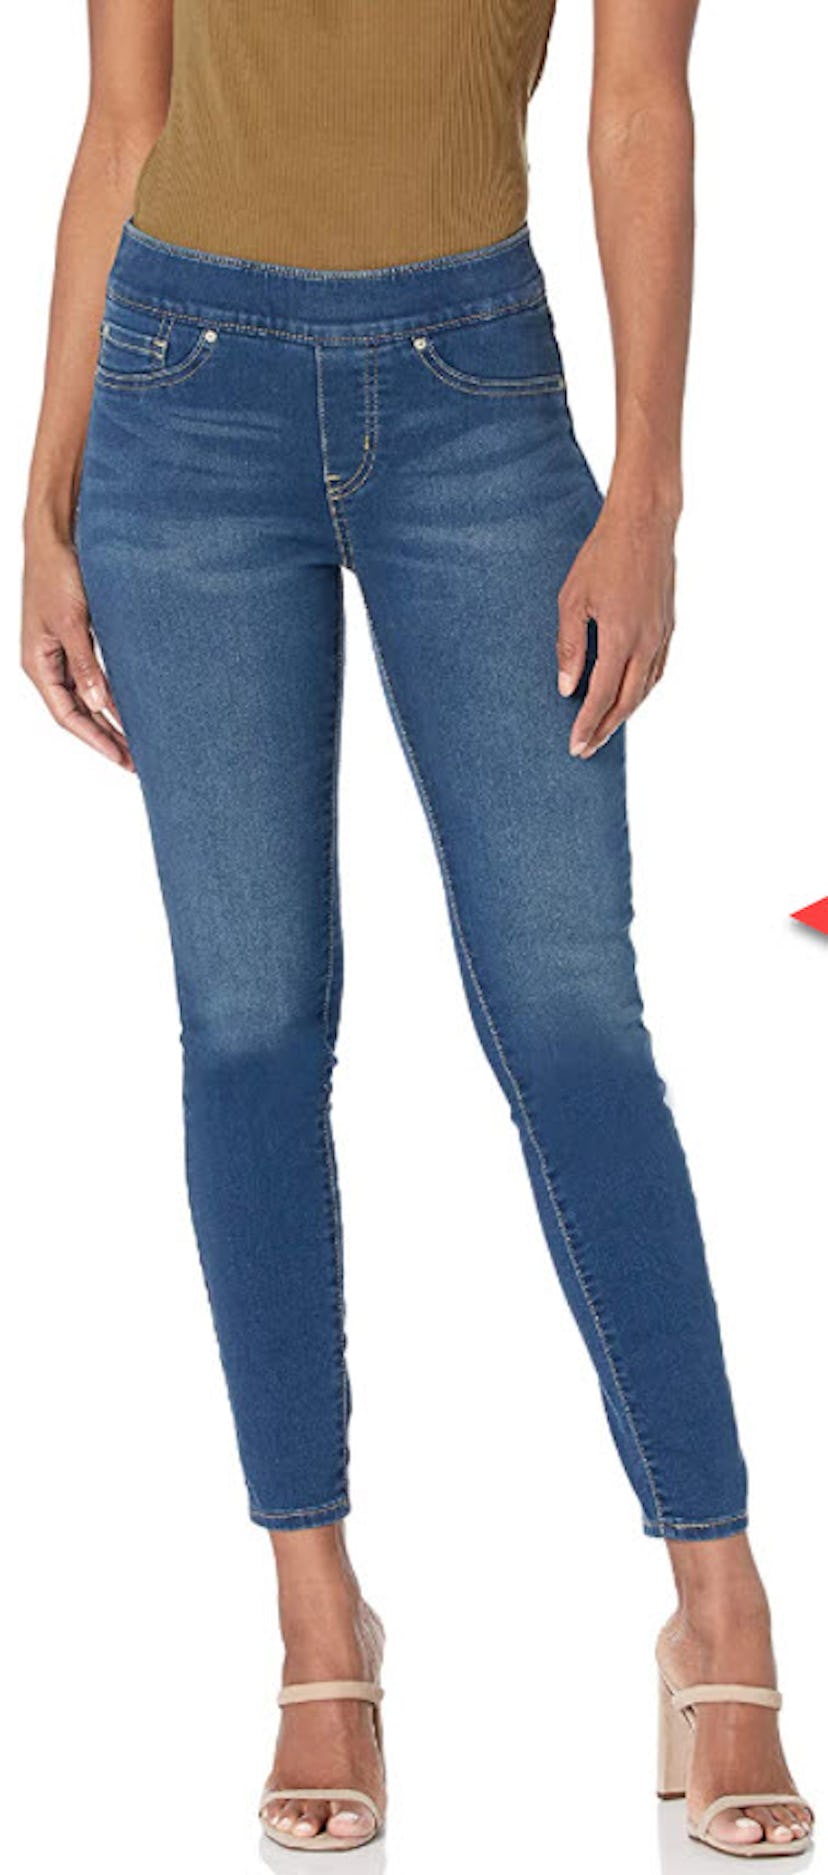 Signature by Levi Strauss & Co. Gold Label Totally Shaping Pull-on Skinny Jeans